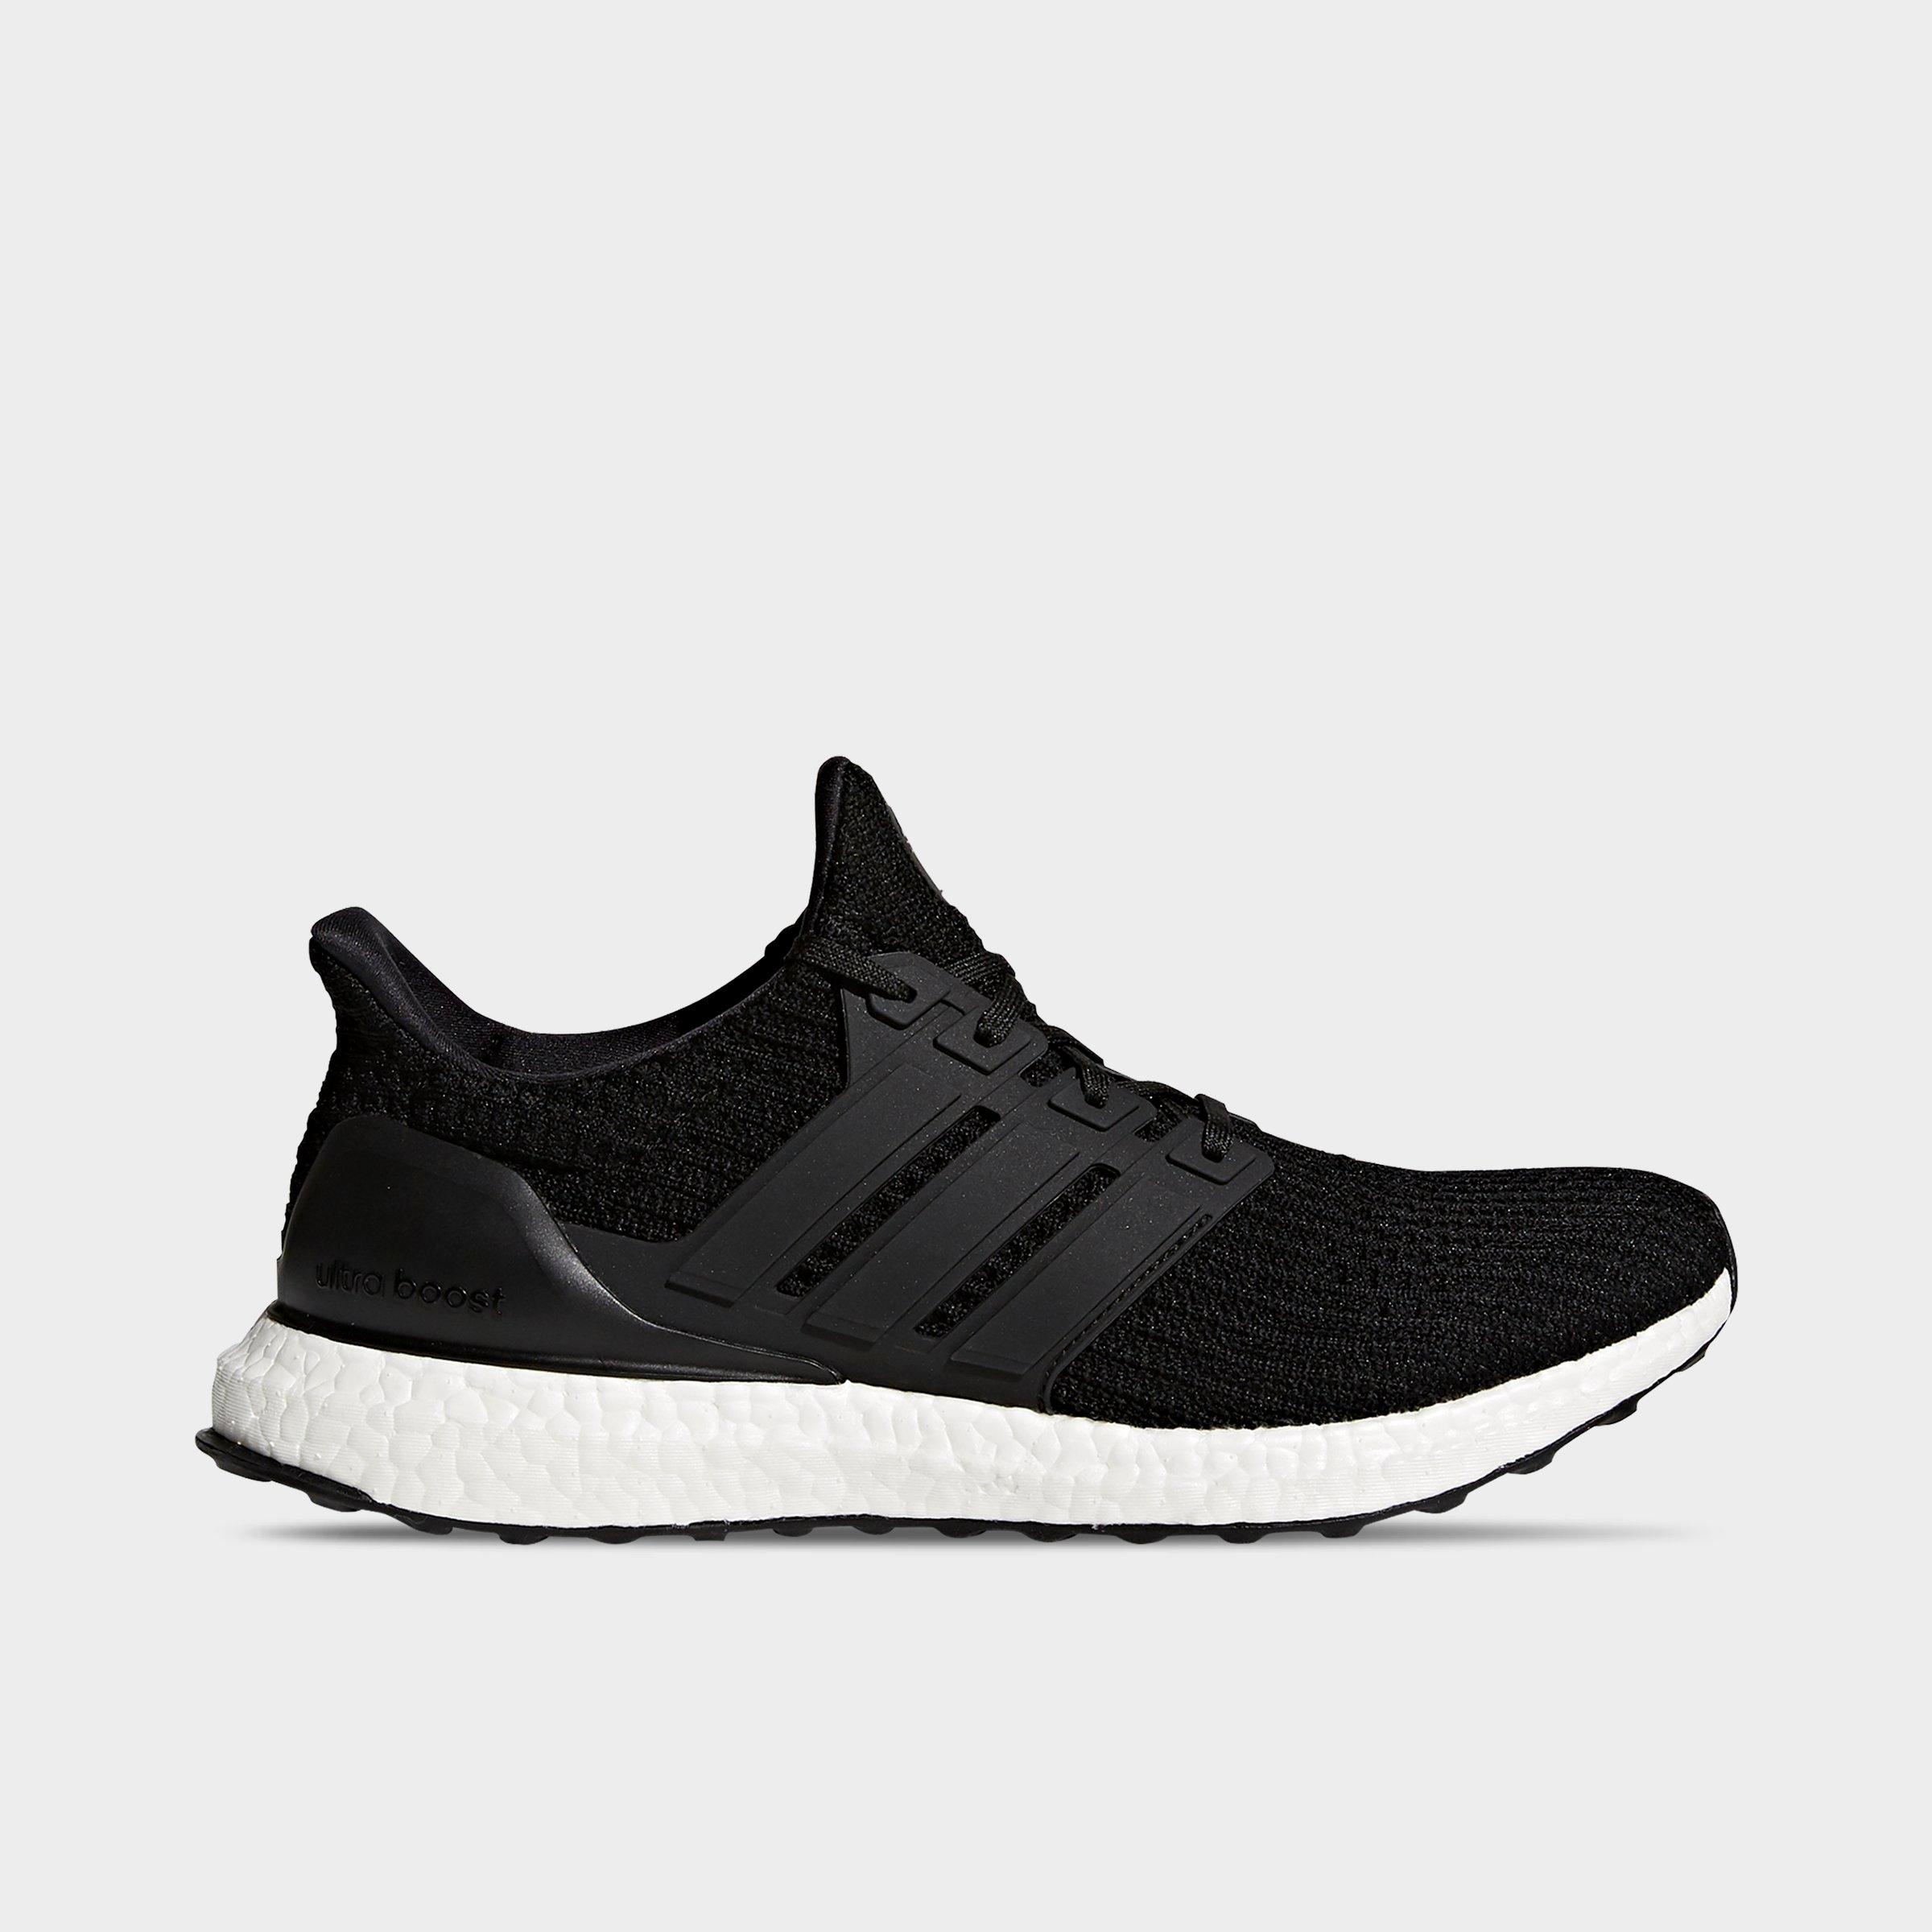 UPC 191028357297 product image for Adidas Men's UltraBOOST Running Shoes in Black/Core Black Size 10.5 Knit | upcitemdb.com